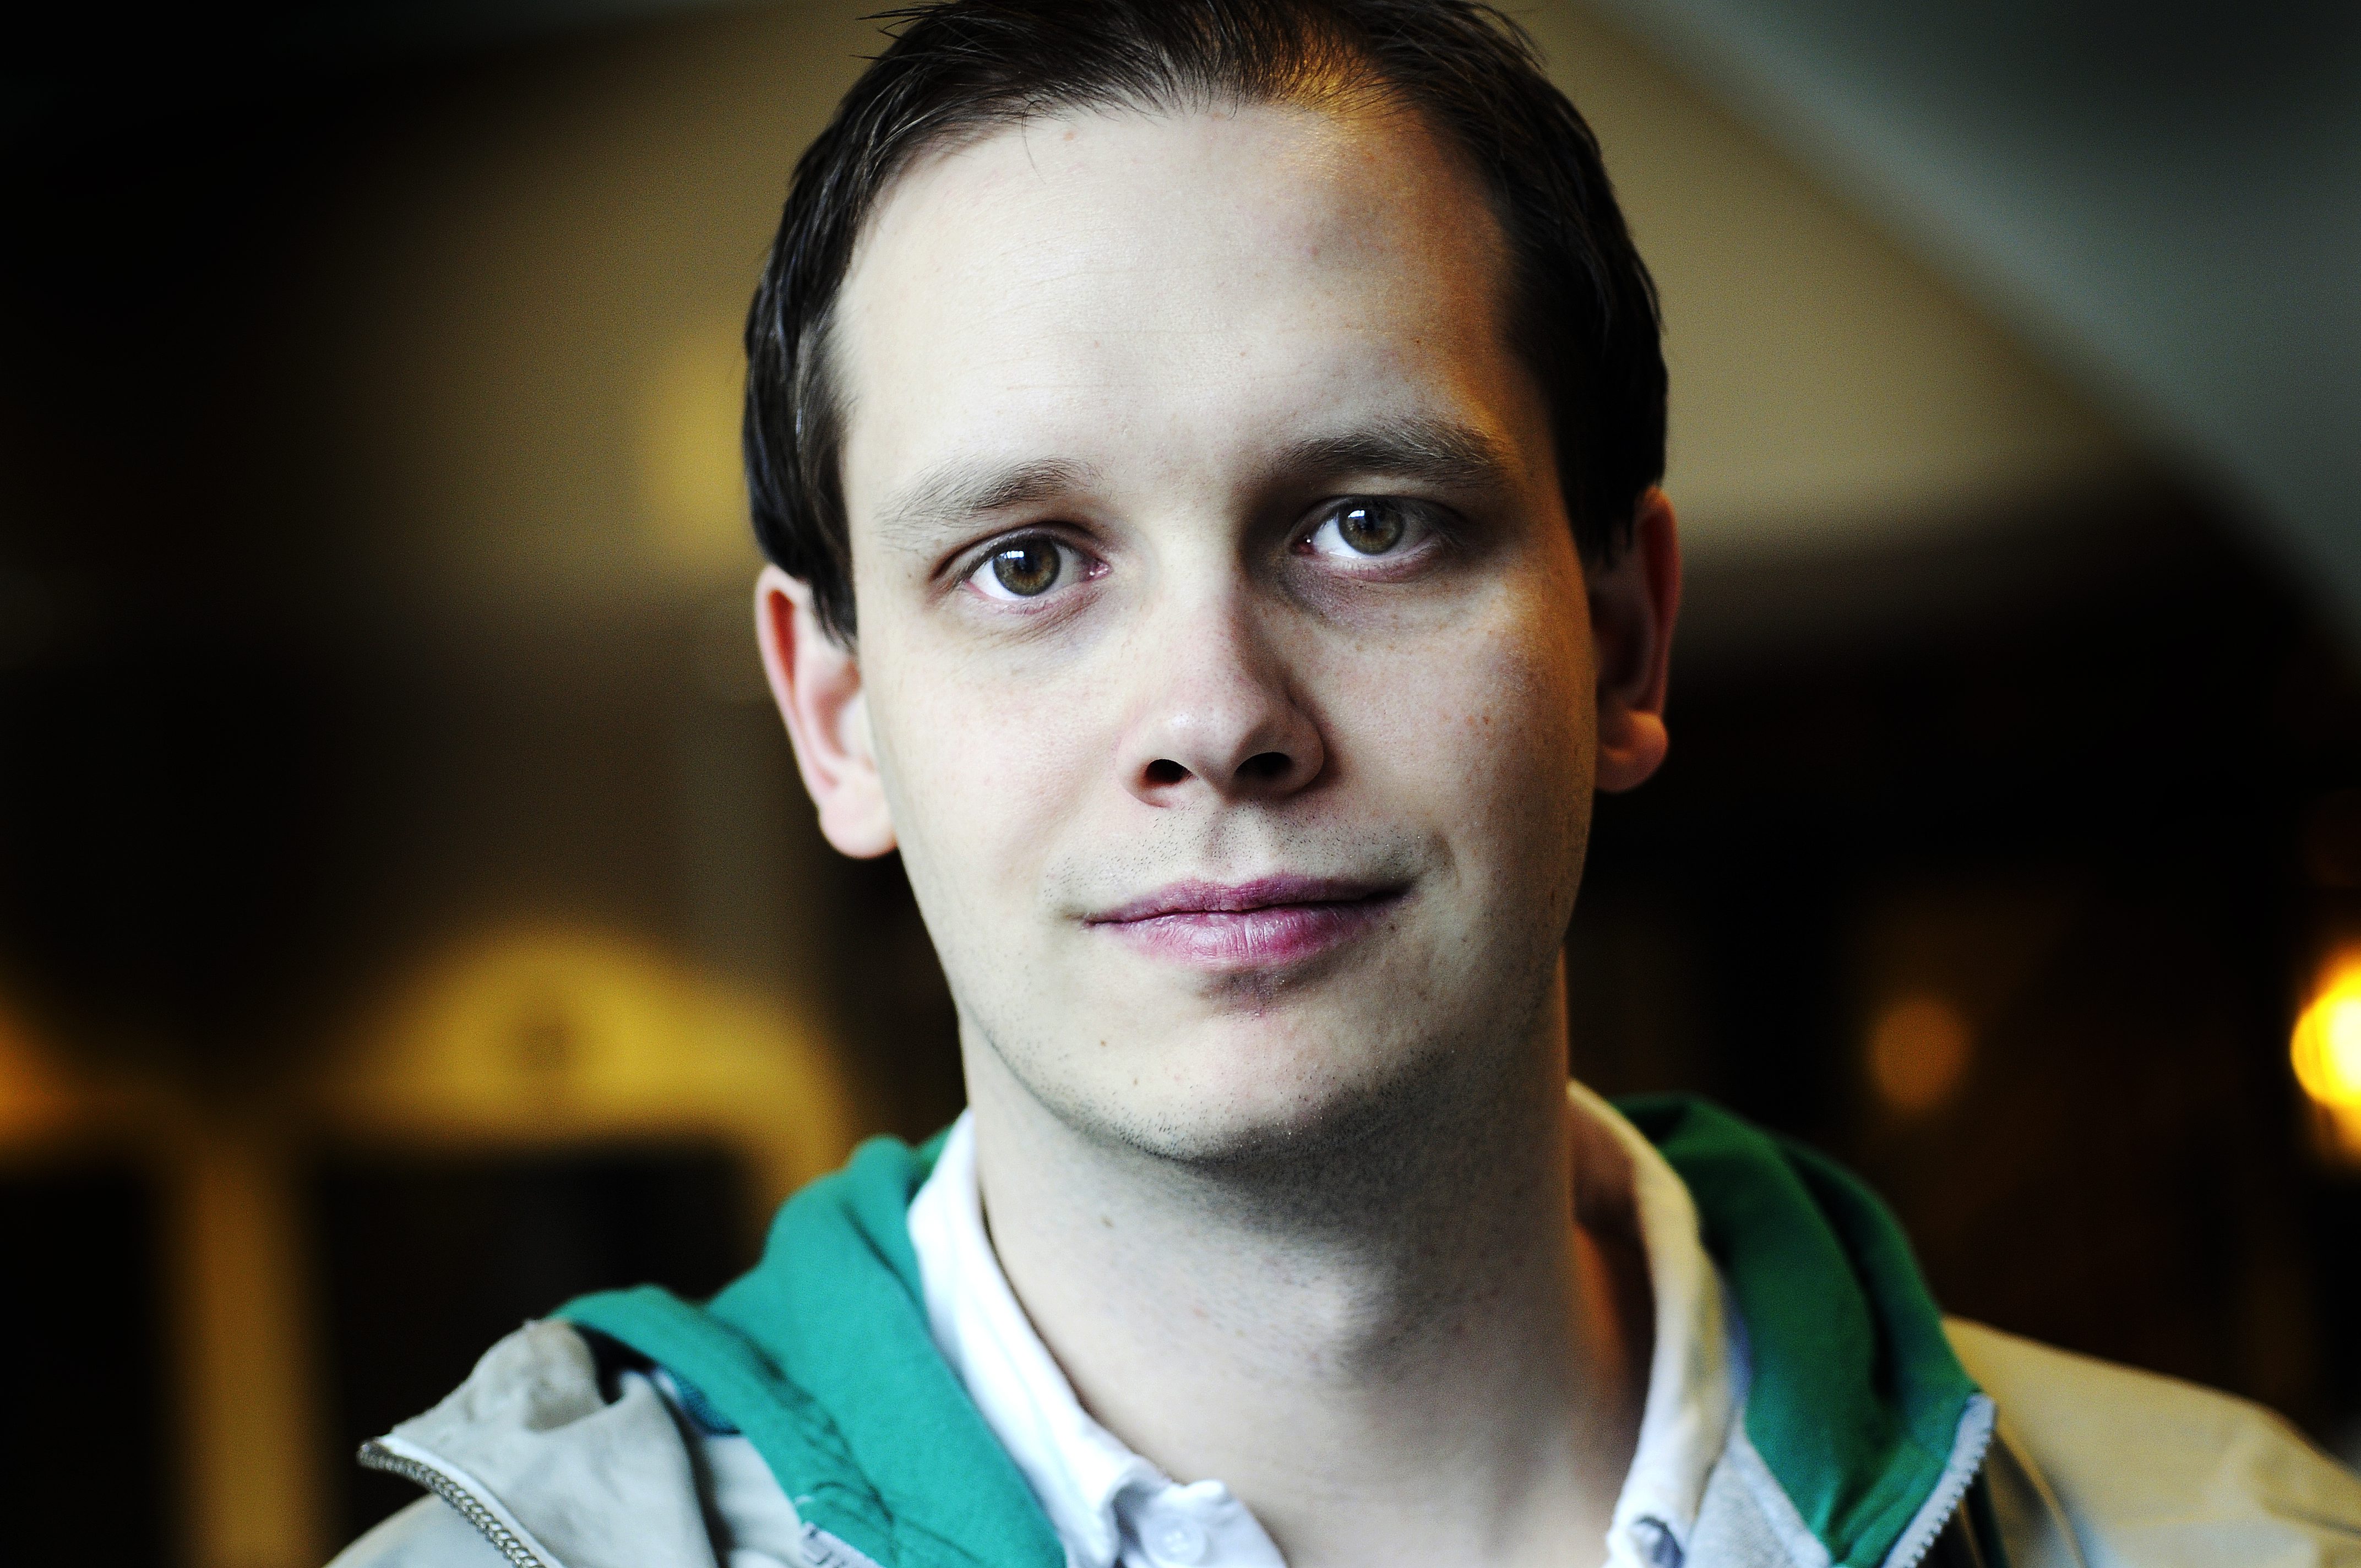 Fildelning, The Pirate Bay, Peter Sunde